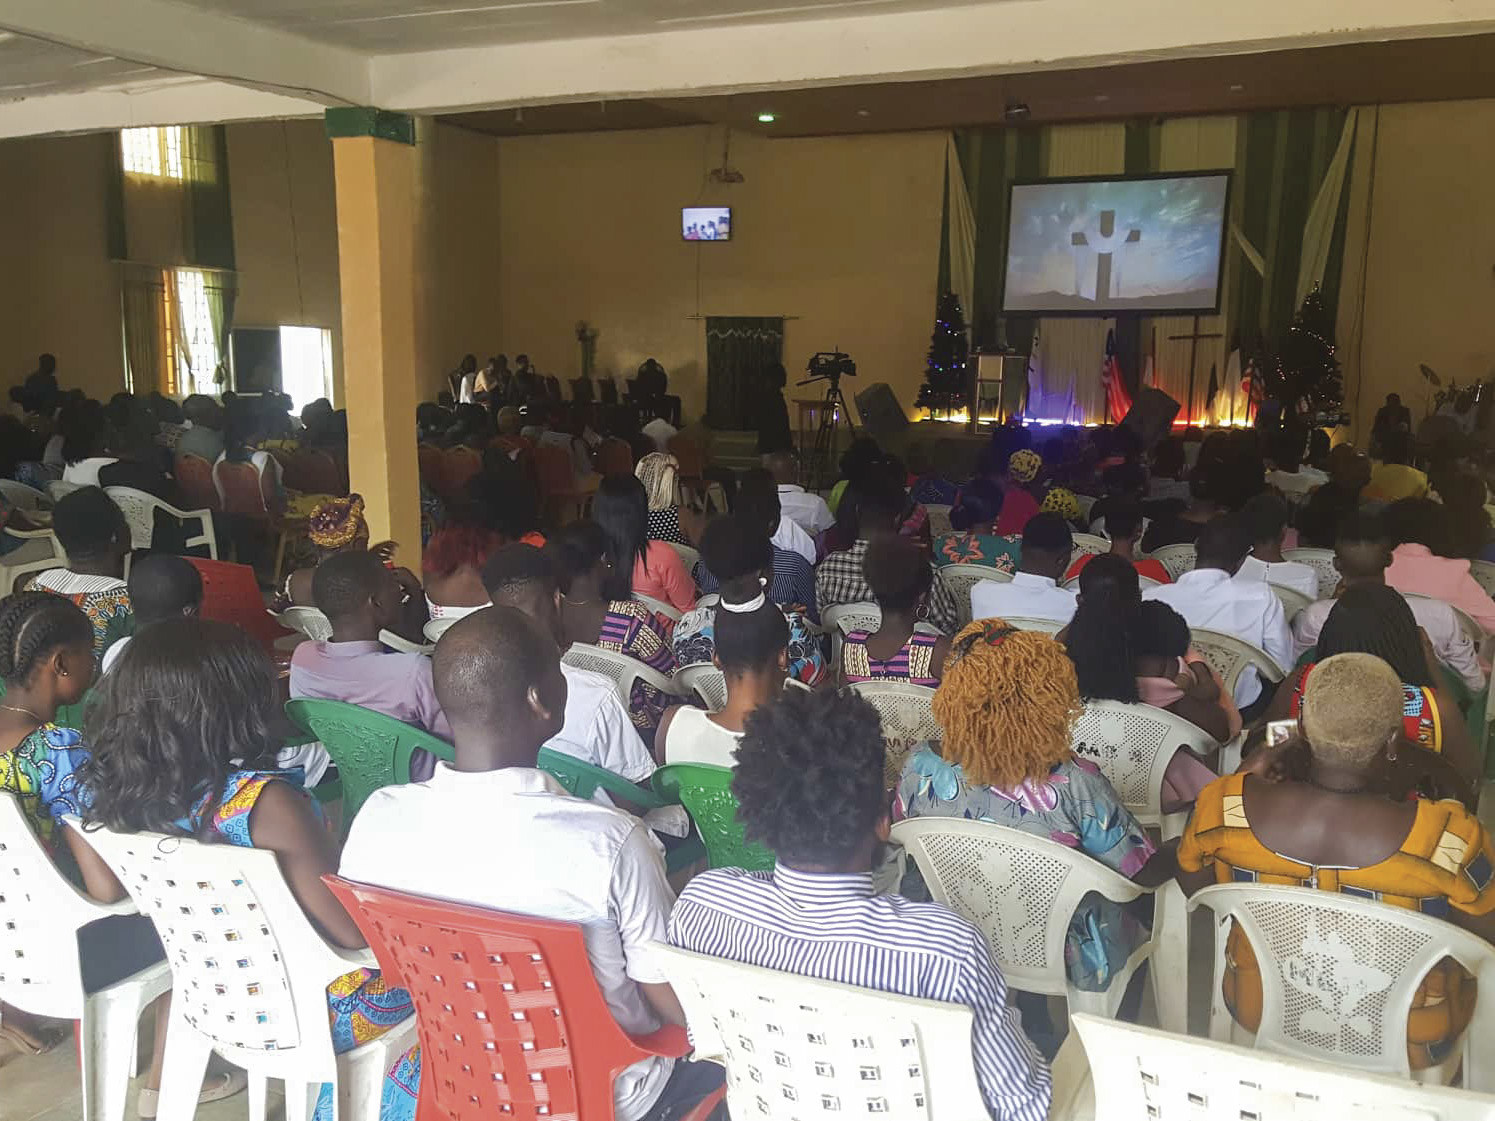 Christians in Gambia gathered together in a large church facing toward a projector screen